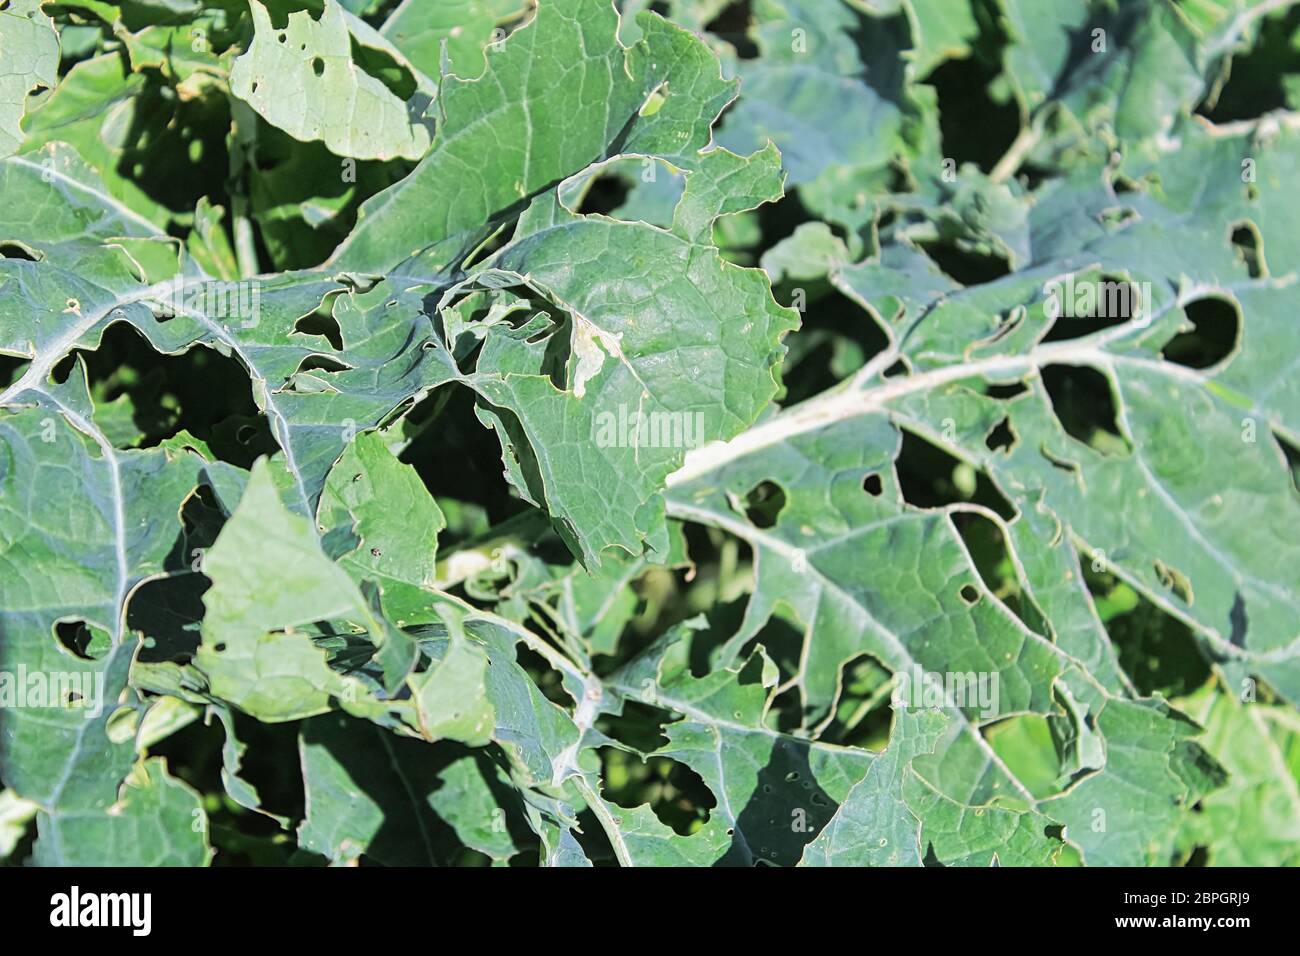 Cabbage Moth damage seen on broccoli leaves. Stock Photo